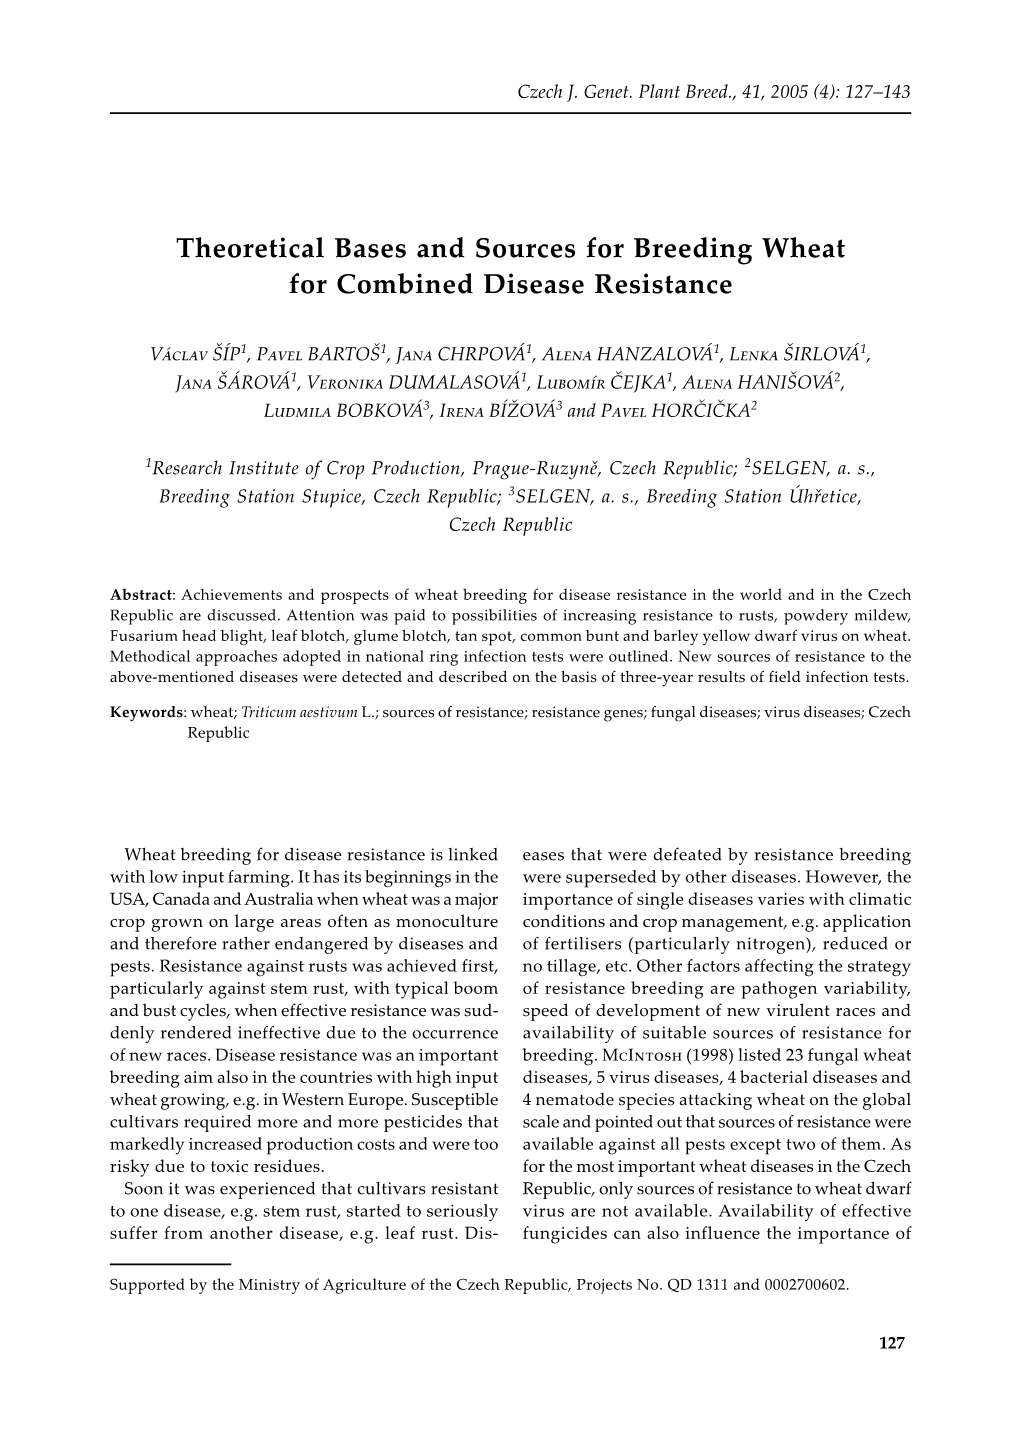 Theoretical Bases and Sources for Breeding Wheat for Combined Disease Resistance